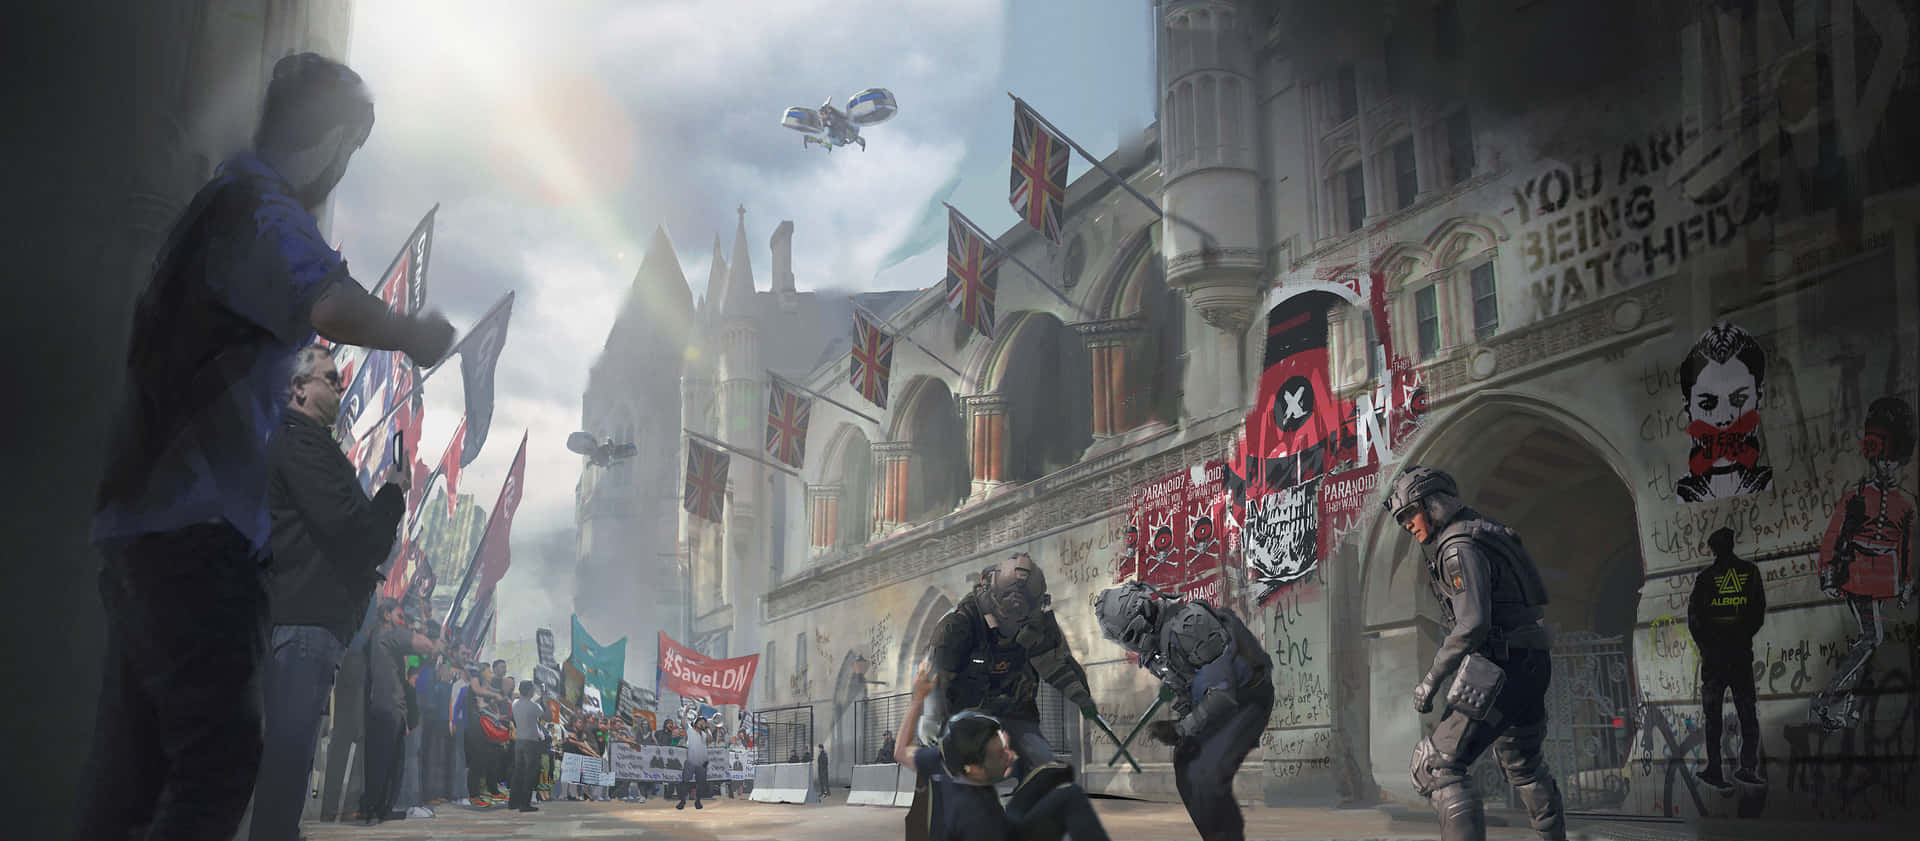 Join forces to take control of the city in Watch Dogs Wallpaper